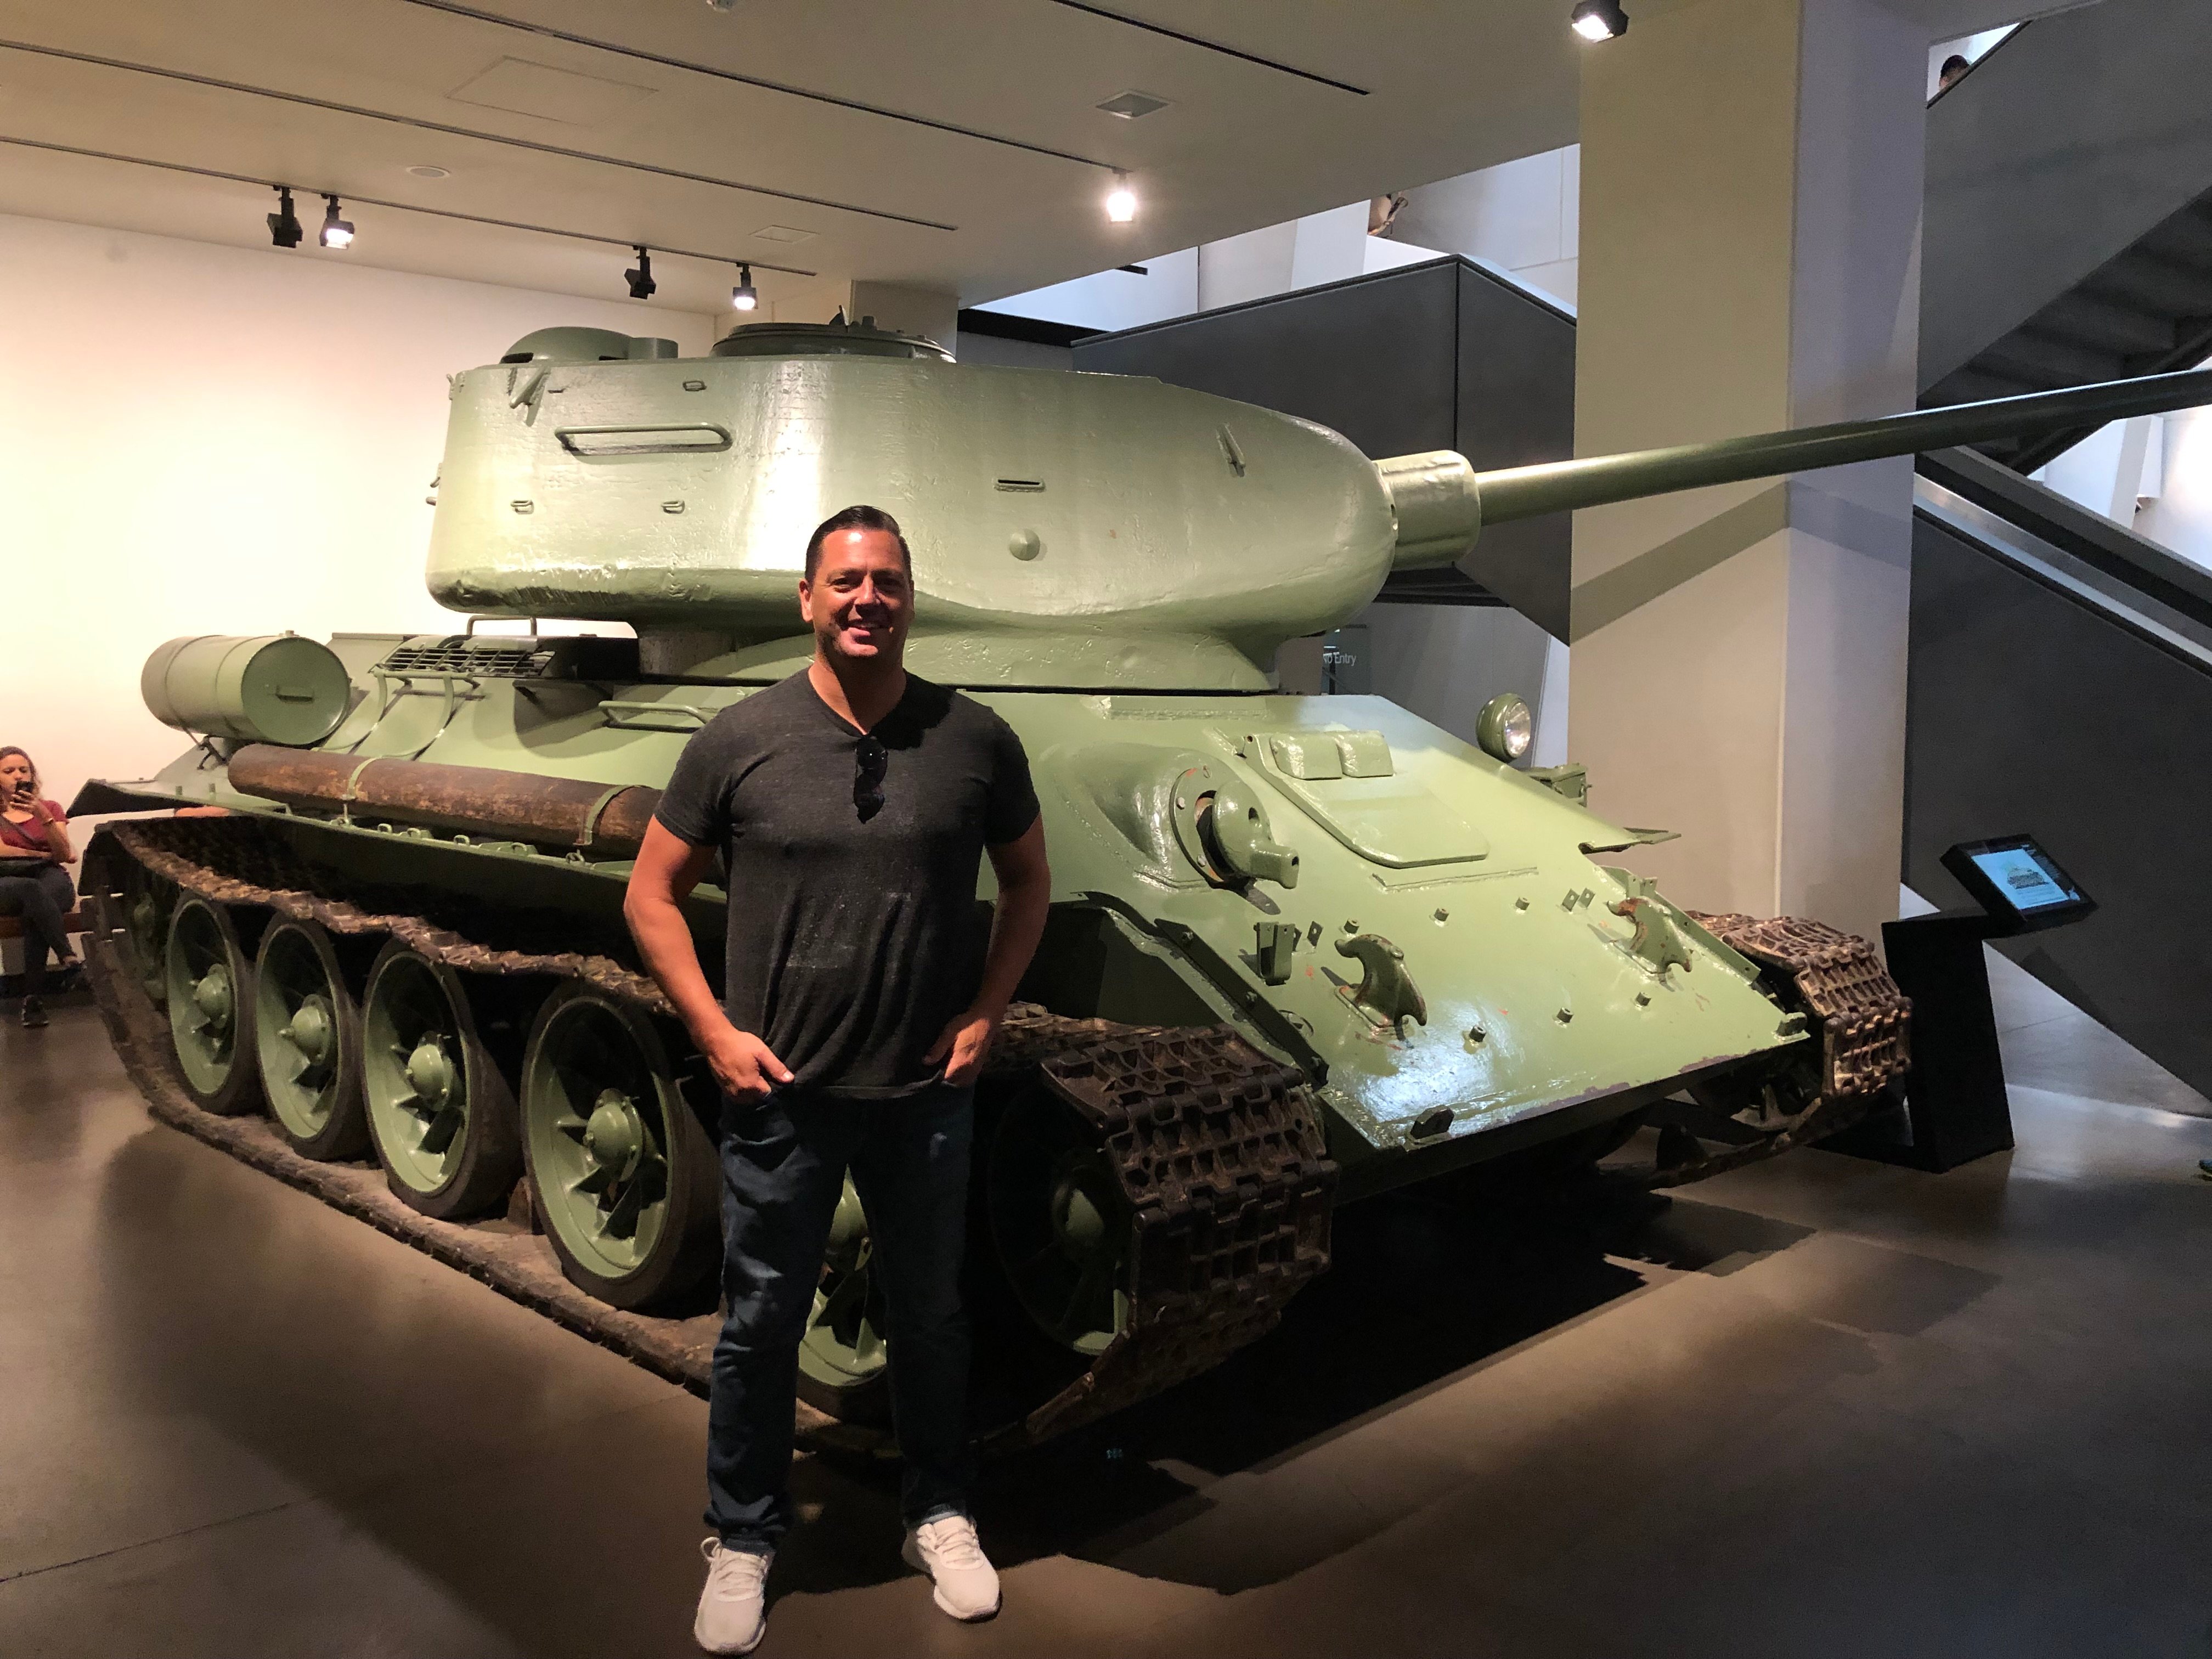 Matthew standing with a tank